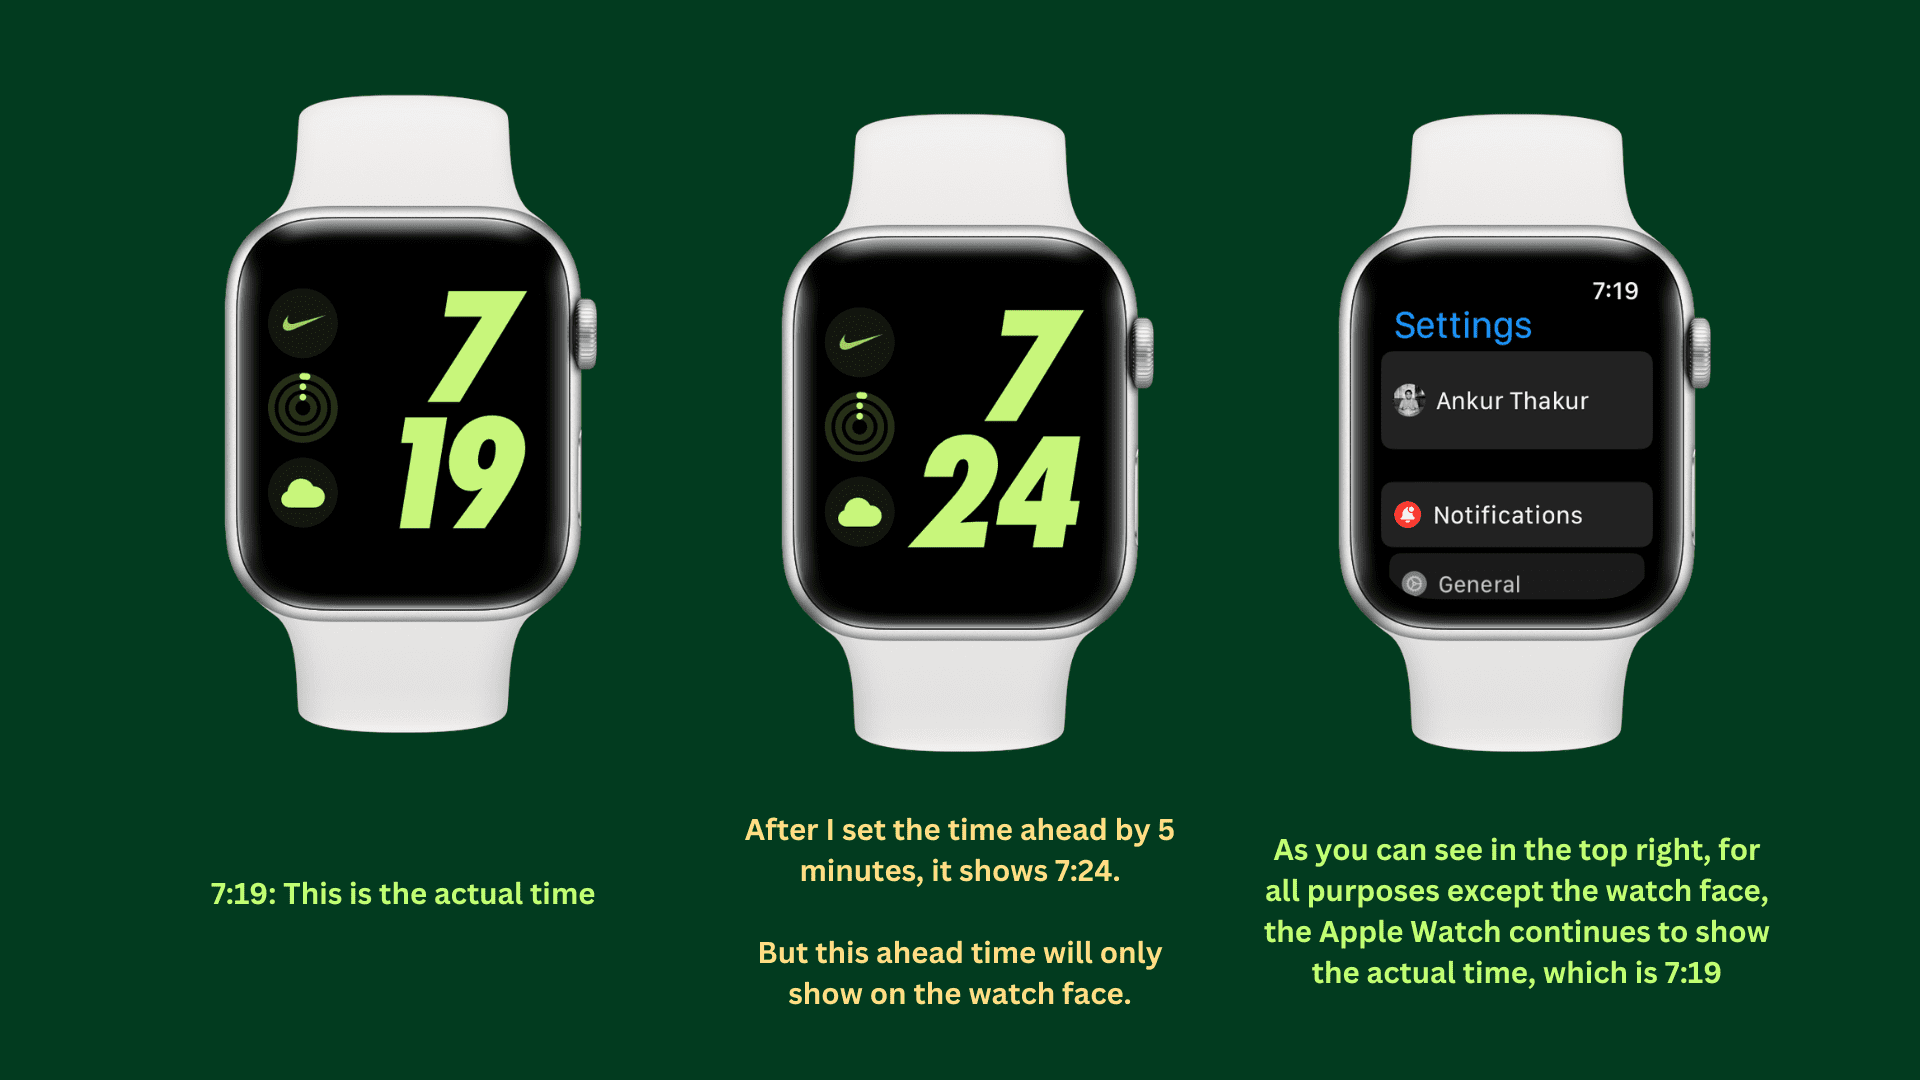 Image explaining actual and ahead time on Apple Watch using three watch mockups